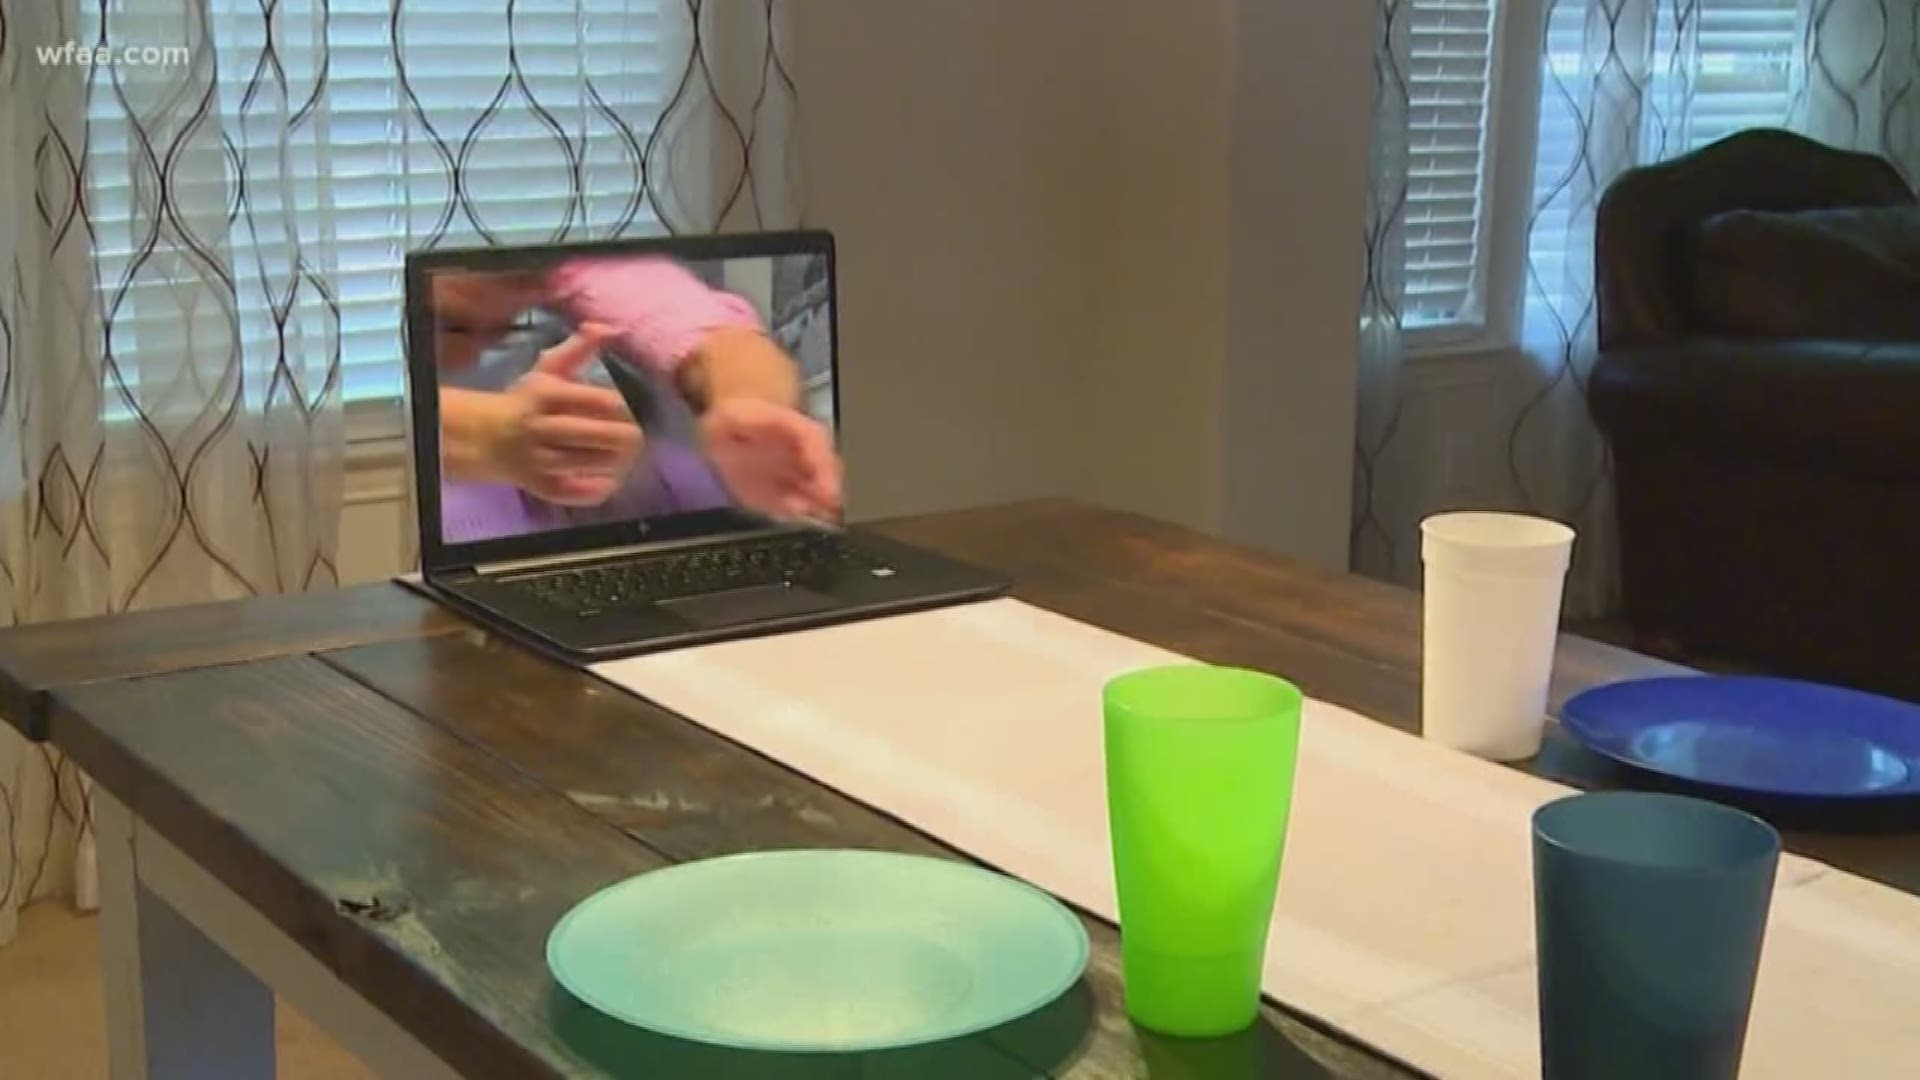 WFAA's Sean Giggy got creative with a local magician to help you make some magic happen at your own home.